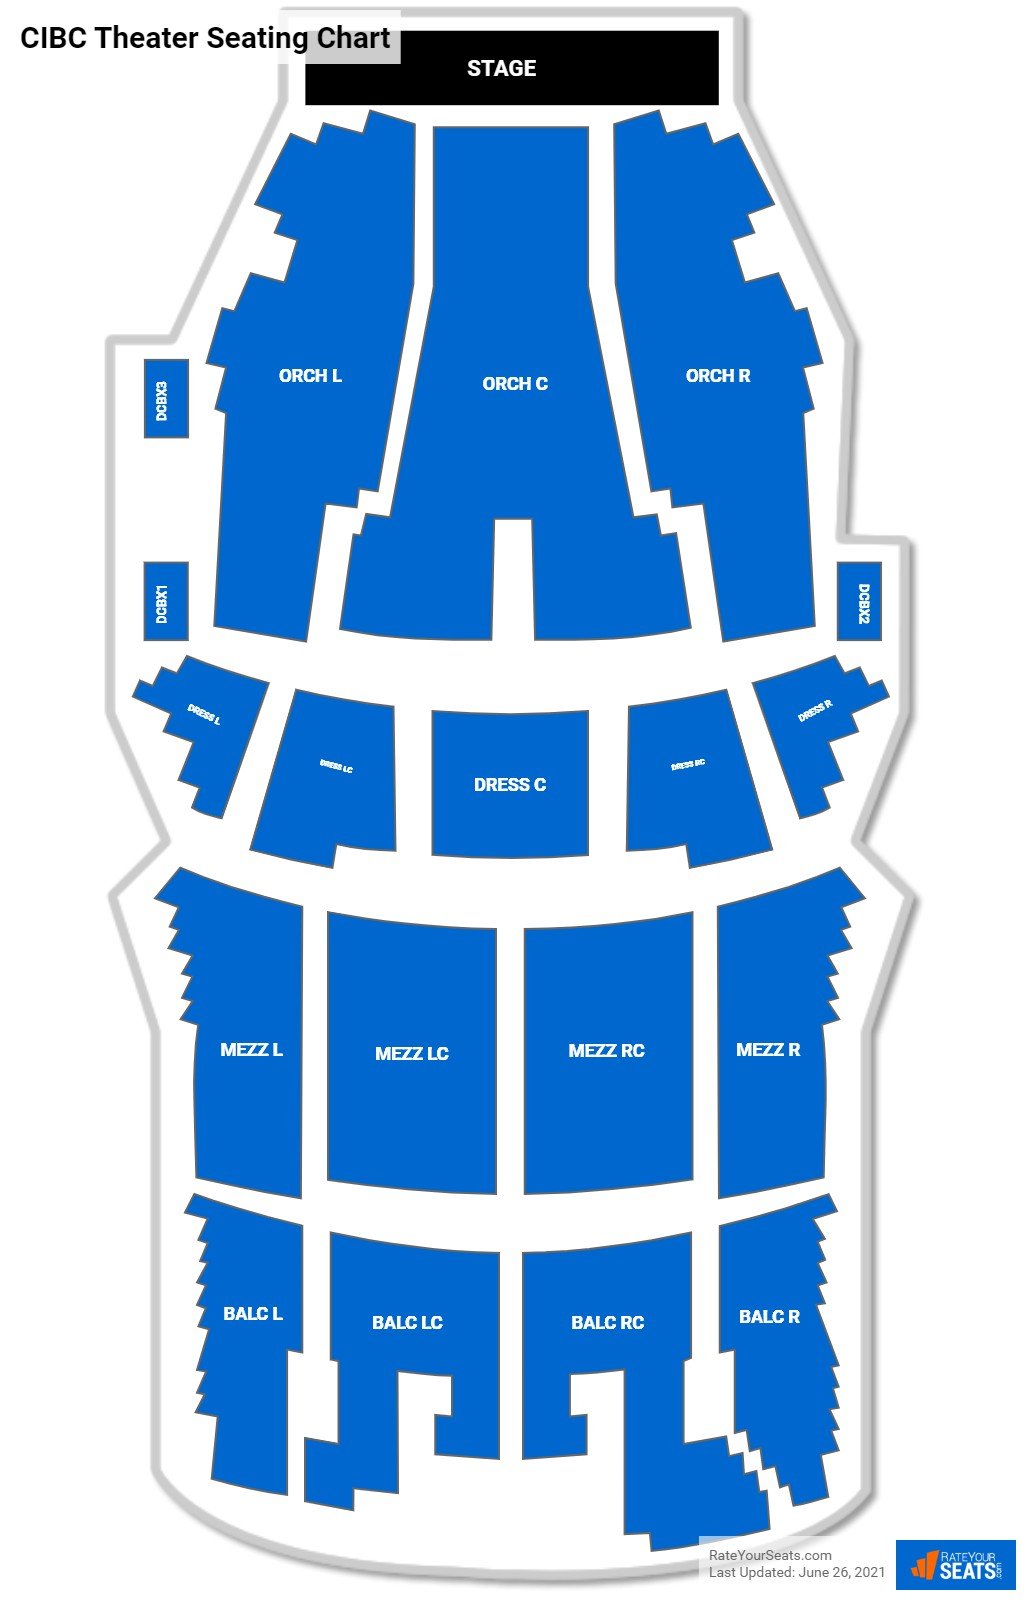 CIBC Theater Theater Seating Chart